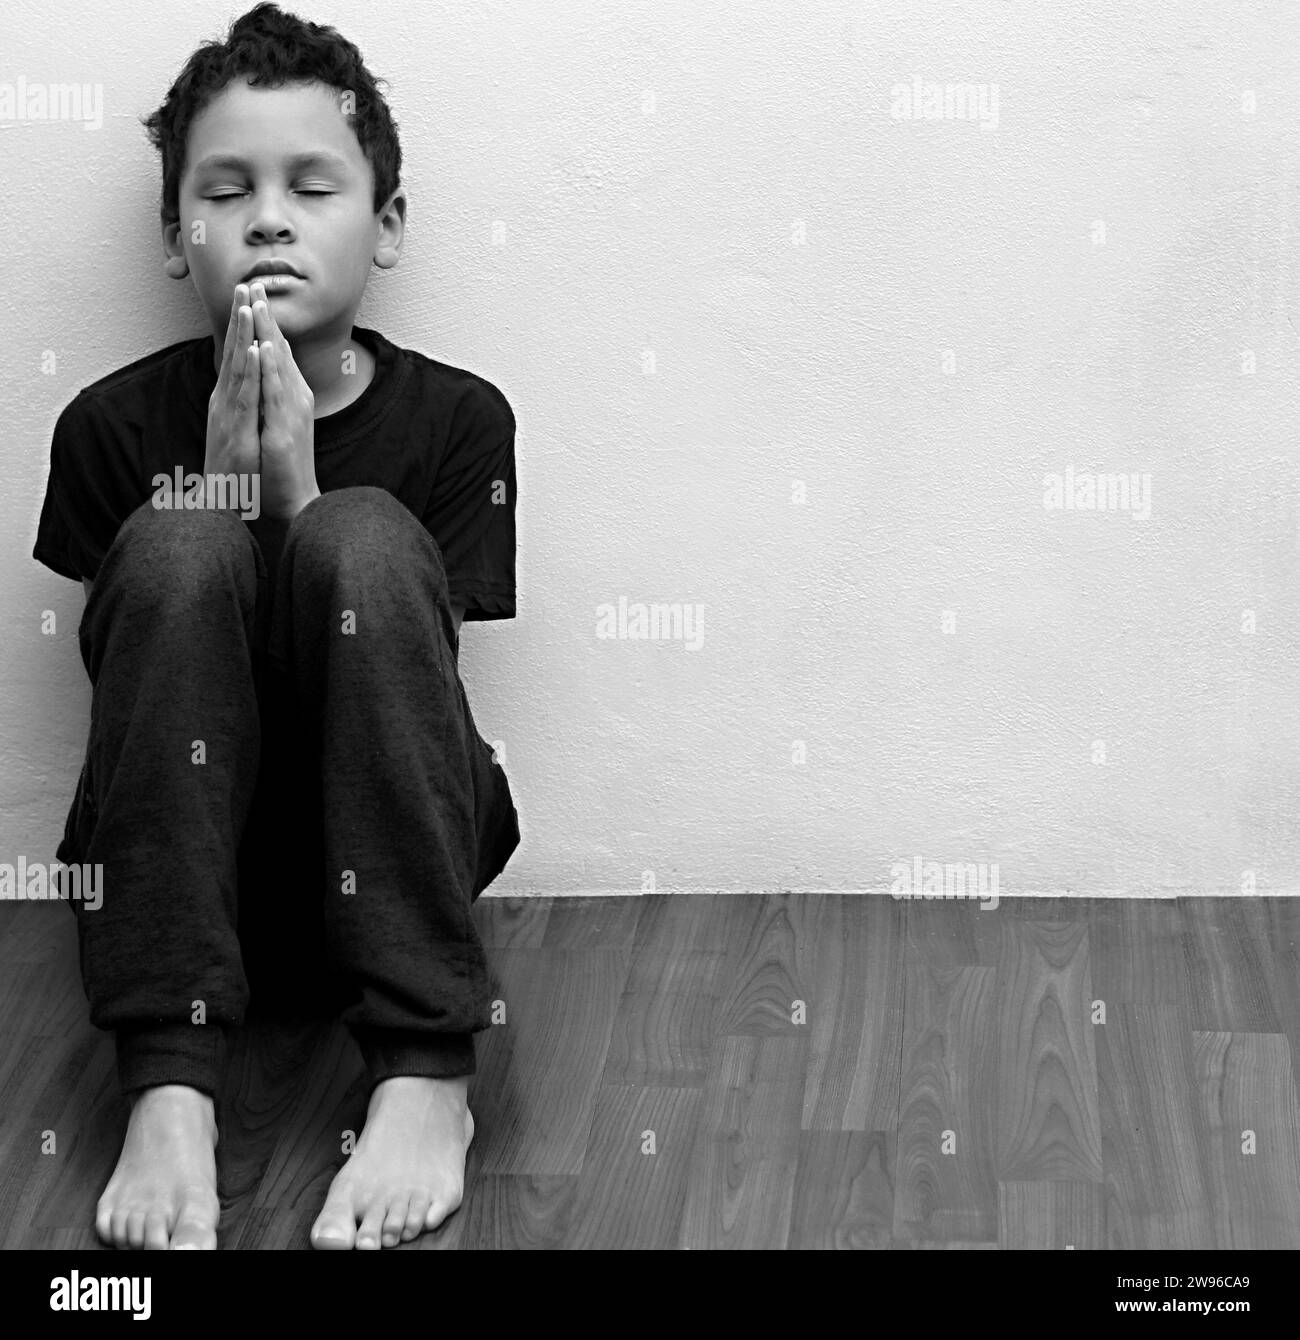 boy praying in poverty on the floor stock image with no help crying alone and all by himself on white background stock photo Stock Photo